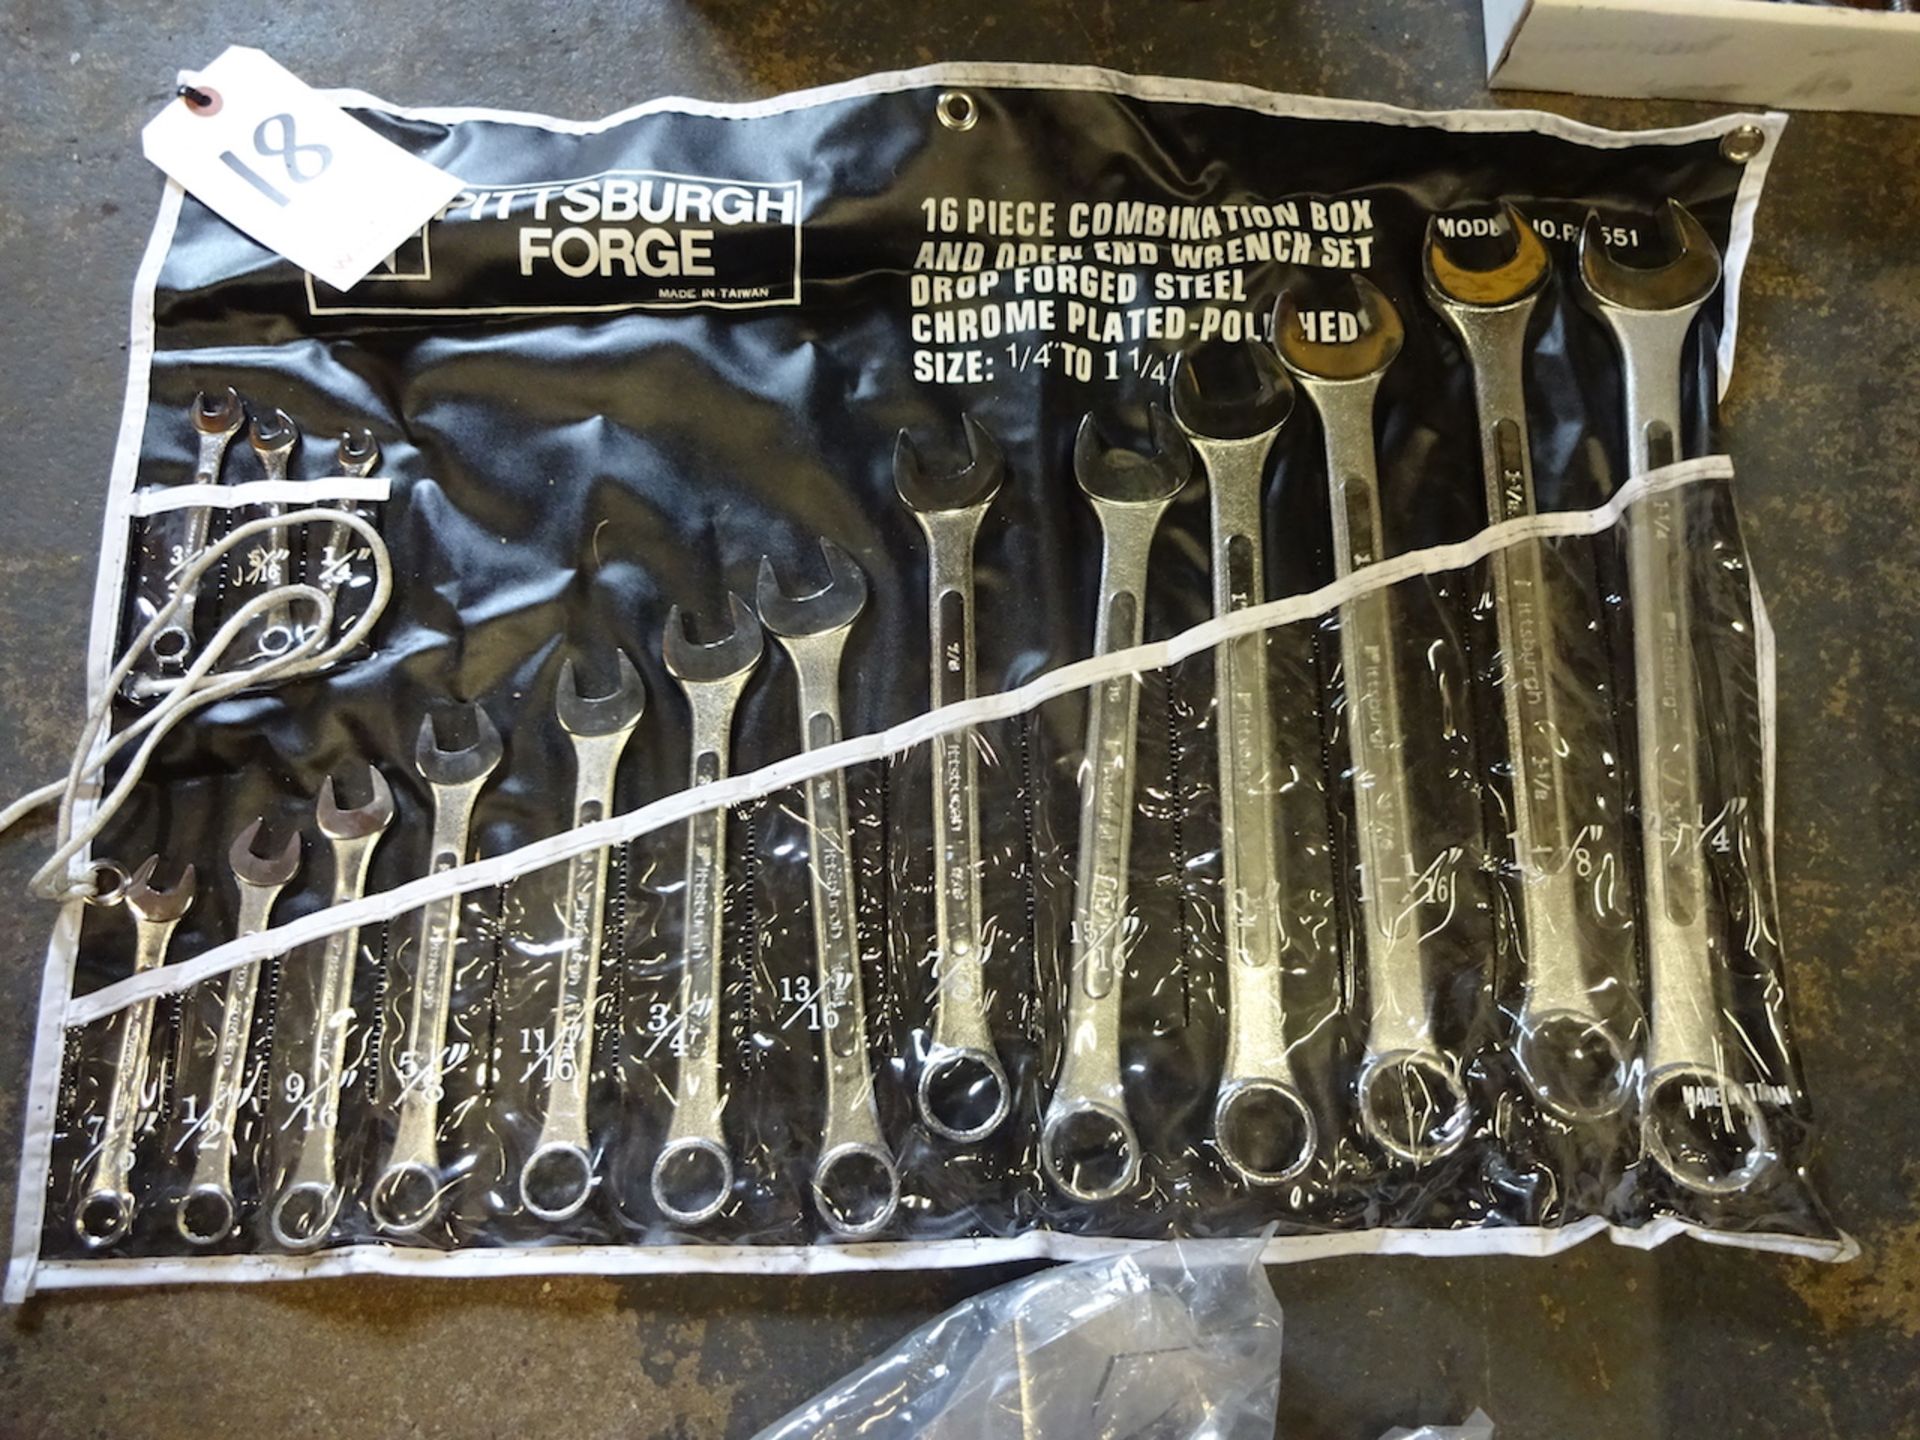 Pittsburgh Forge 16-Piece Combination Box & Open End Wrench Set, 1/4 in. to 1-1/4 in.